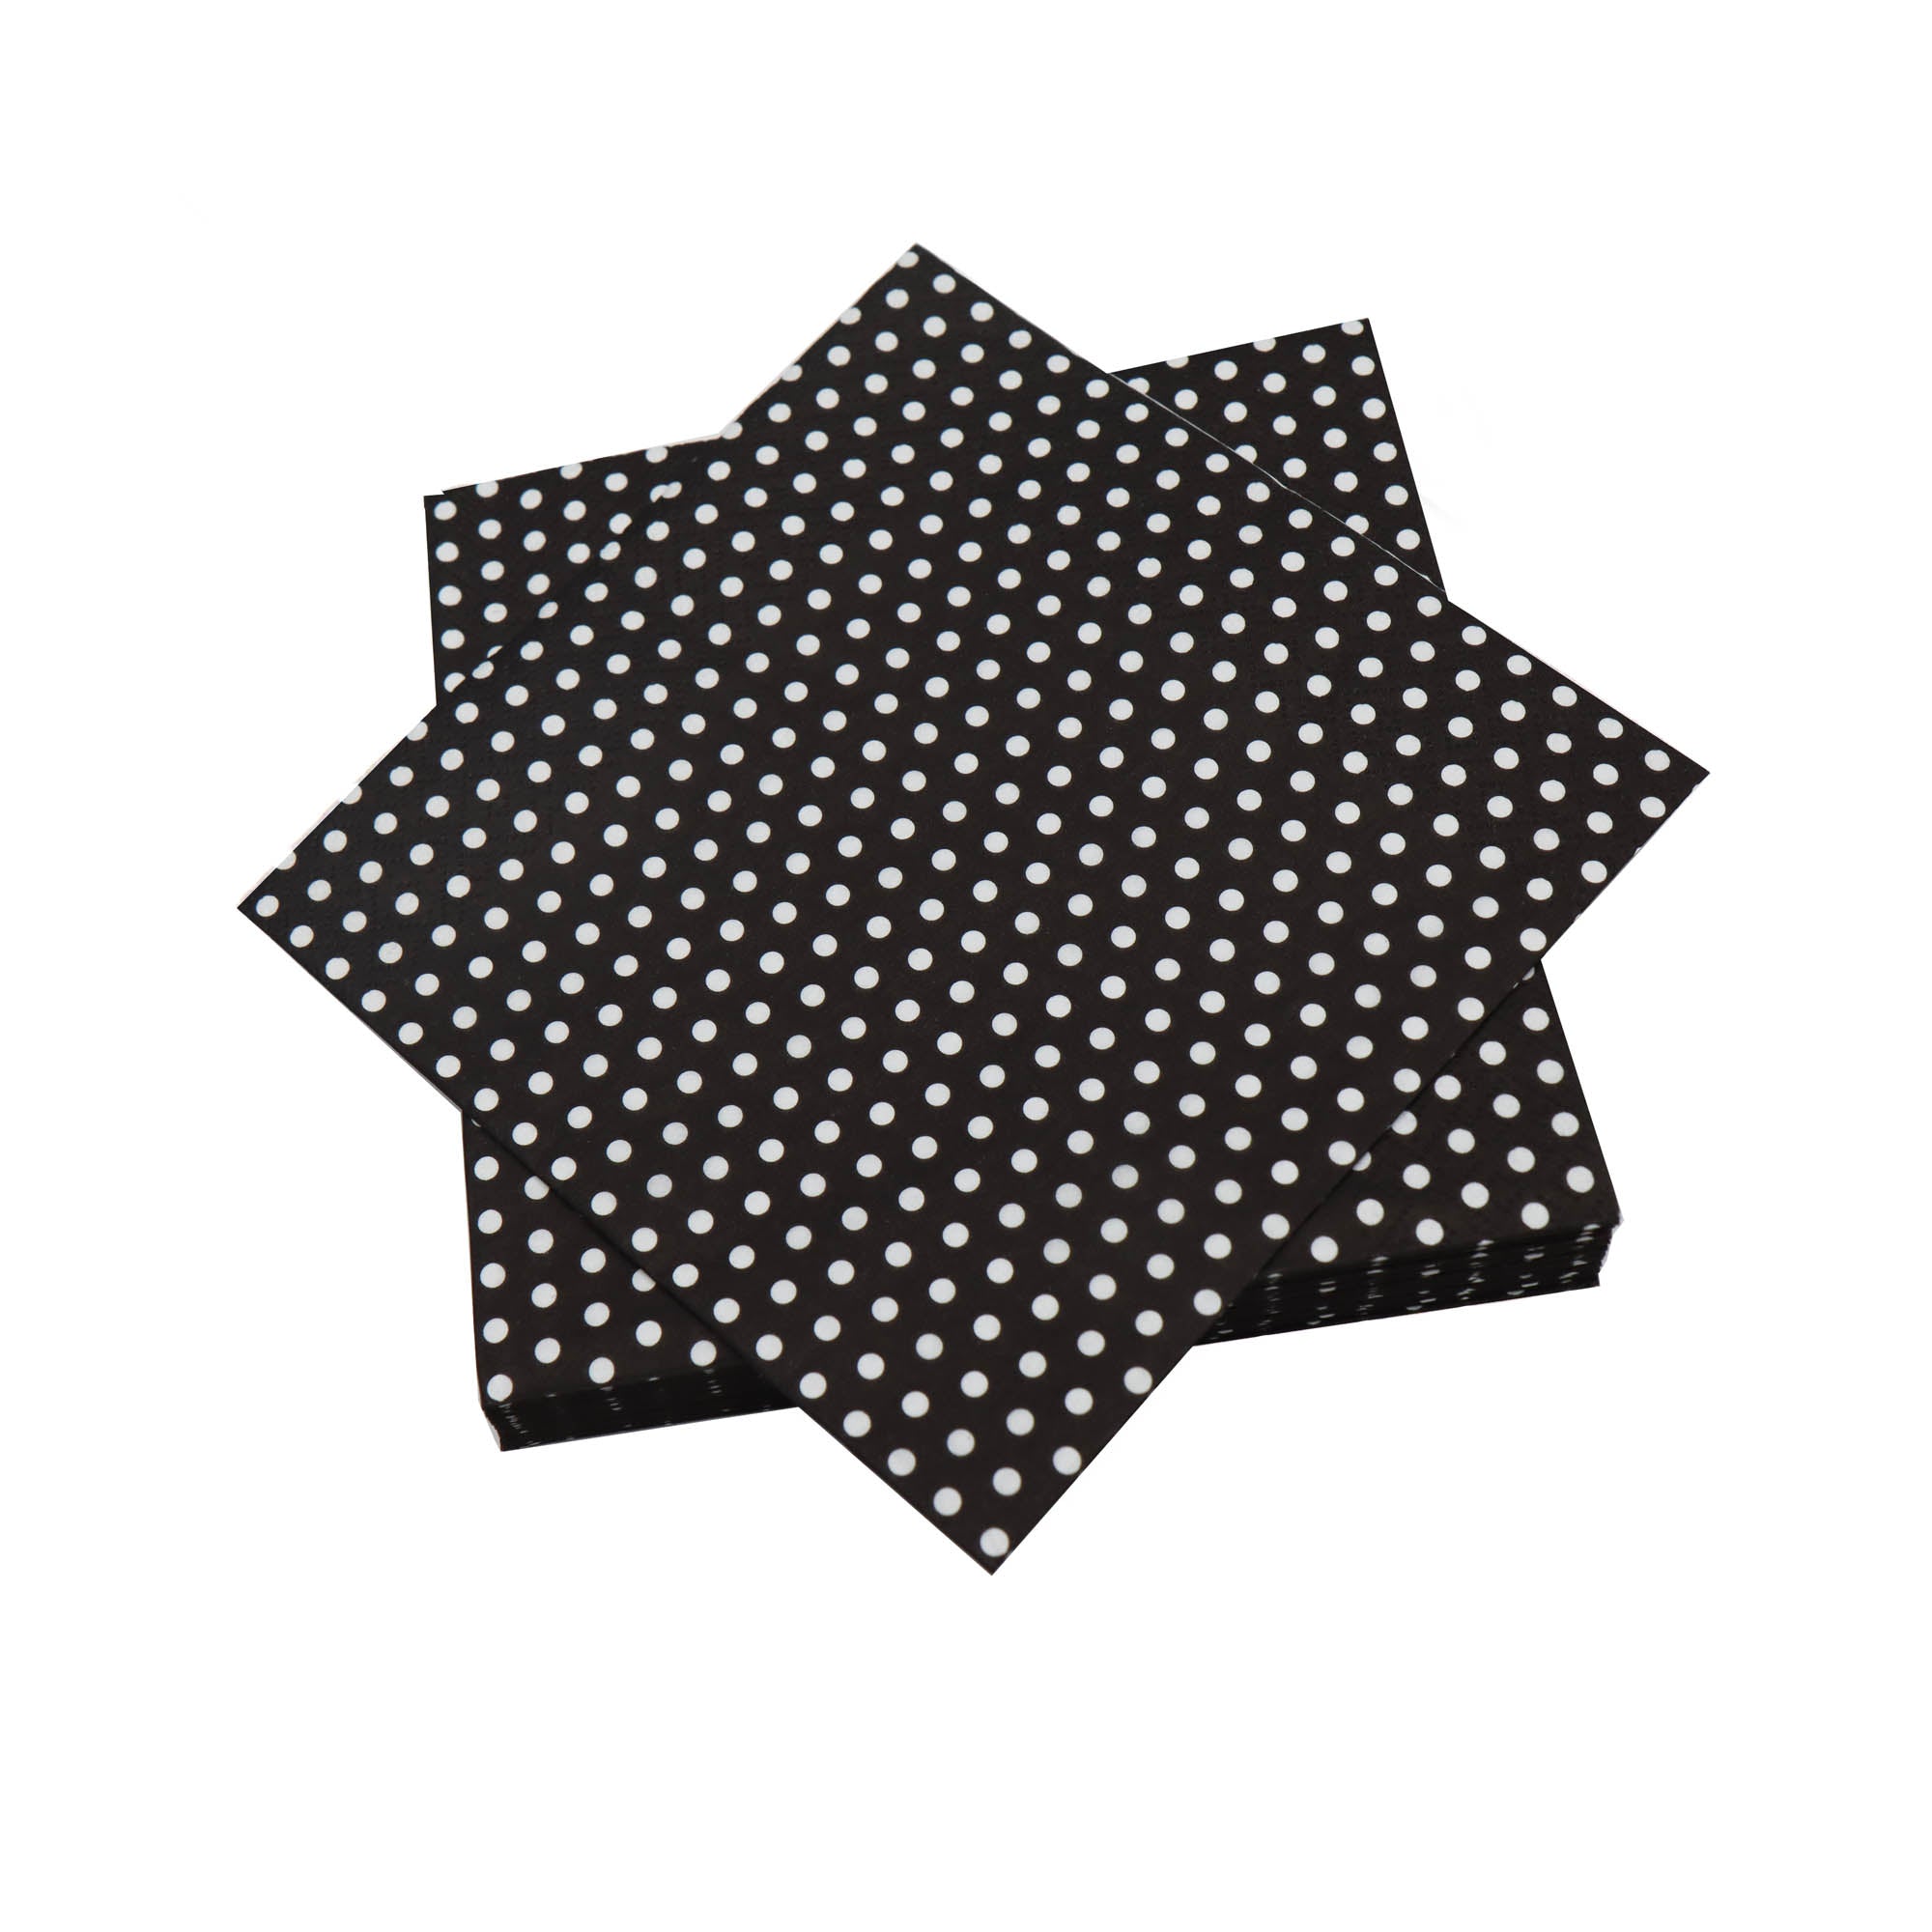 Luncheon Table Paper Serviettes 3ply 33x33cm Black Polka Dots  20pack